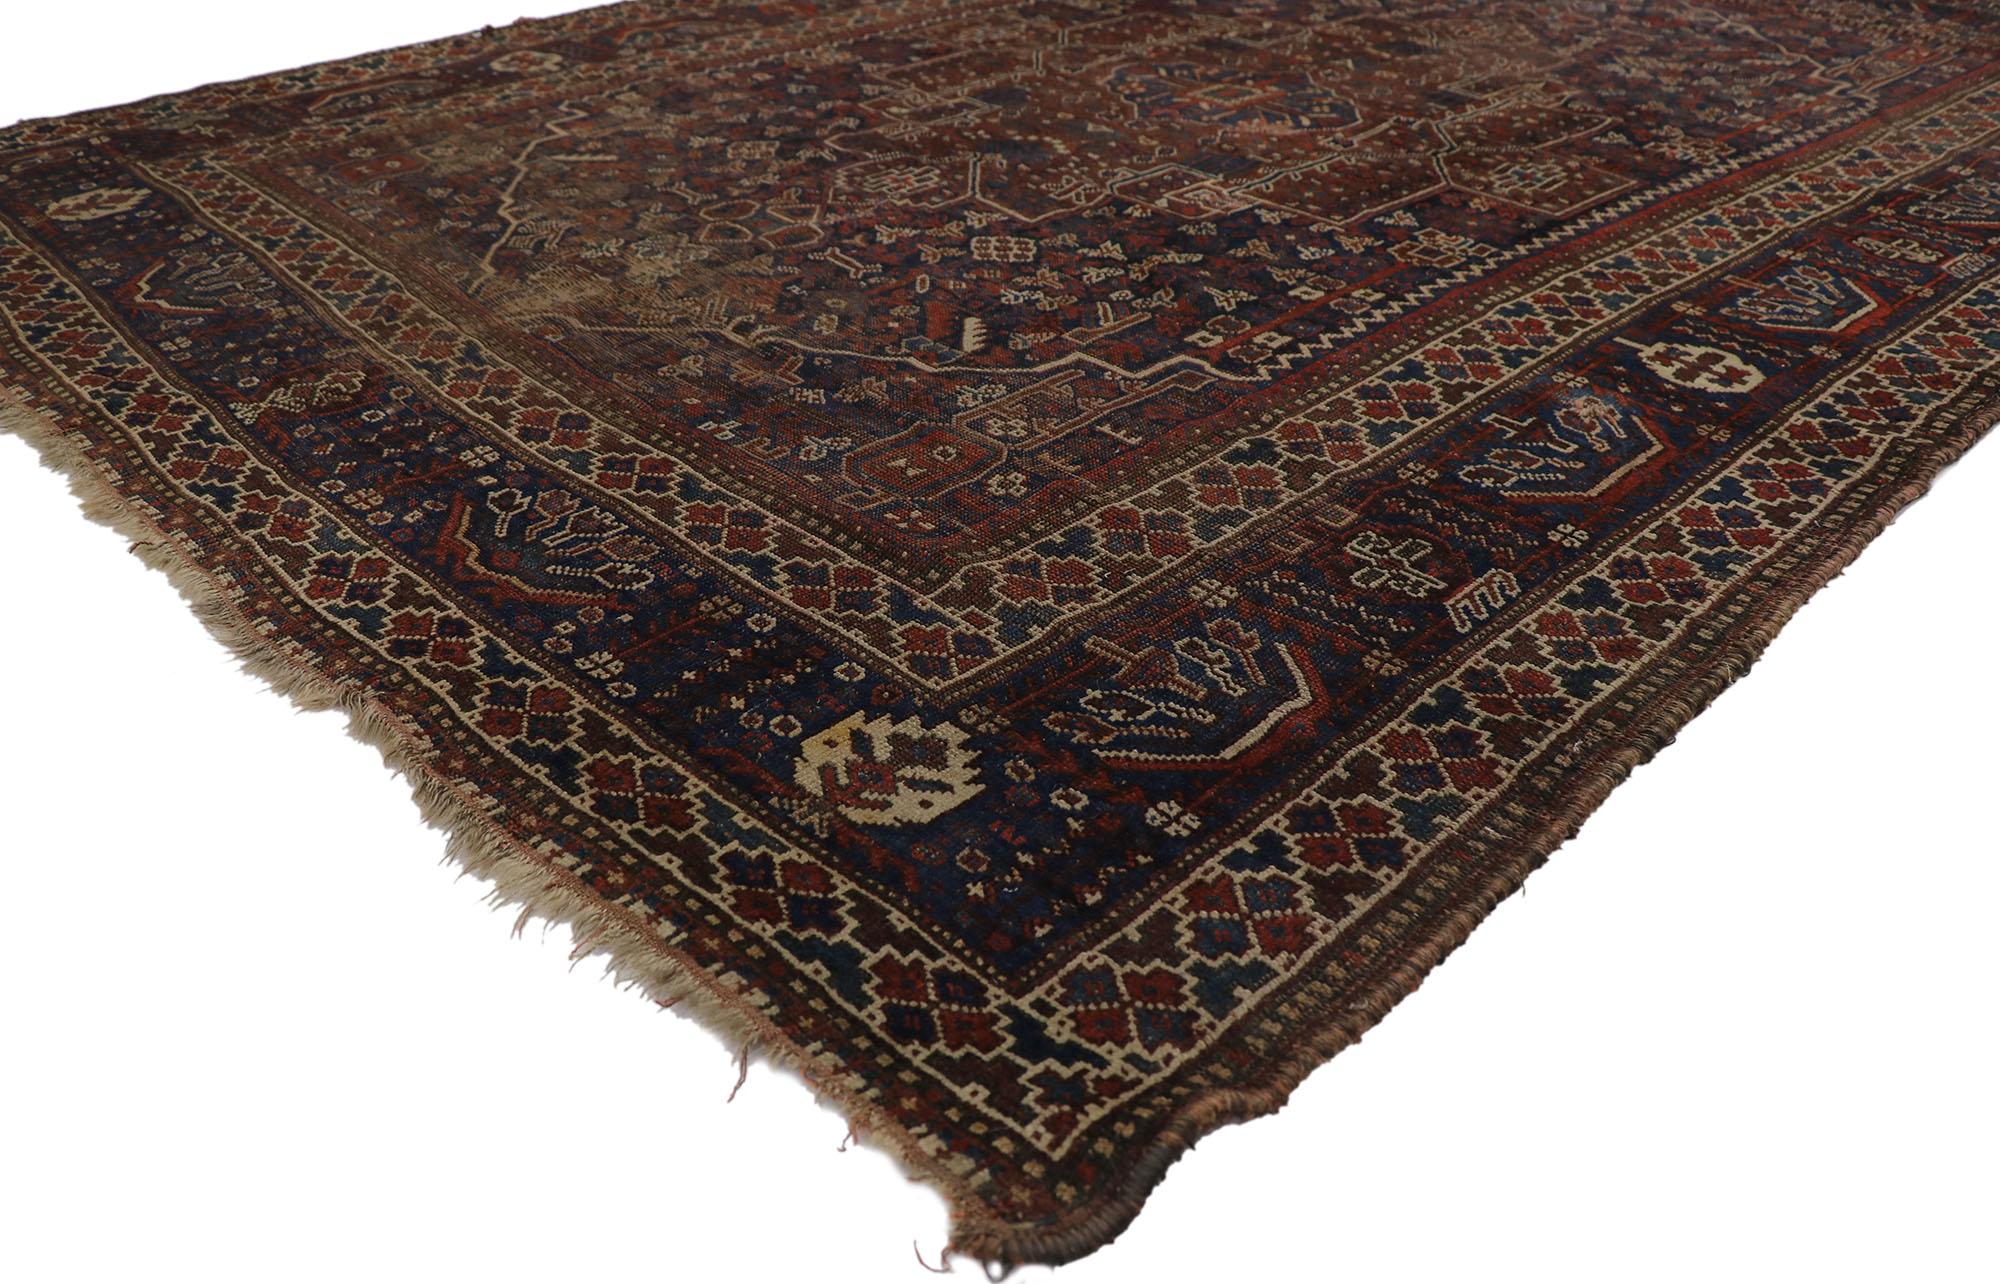 ?21690 Antique Persian Shiraz Rug, 06'10 x 09'01. Emanating nomadic charm with incredible detail and texture, this hand knotted wool antique Persian Shiraz rug is a captivating vision of woven beauty. The eye-catching tribal design and atmospheric